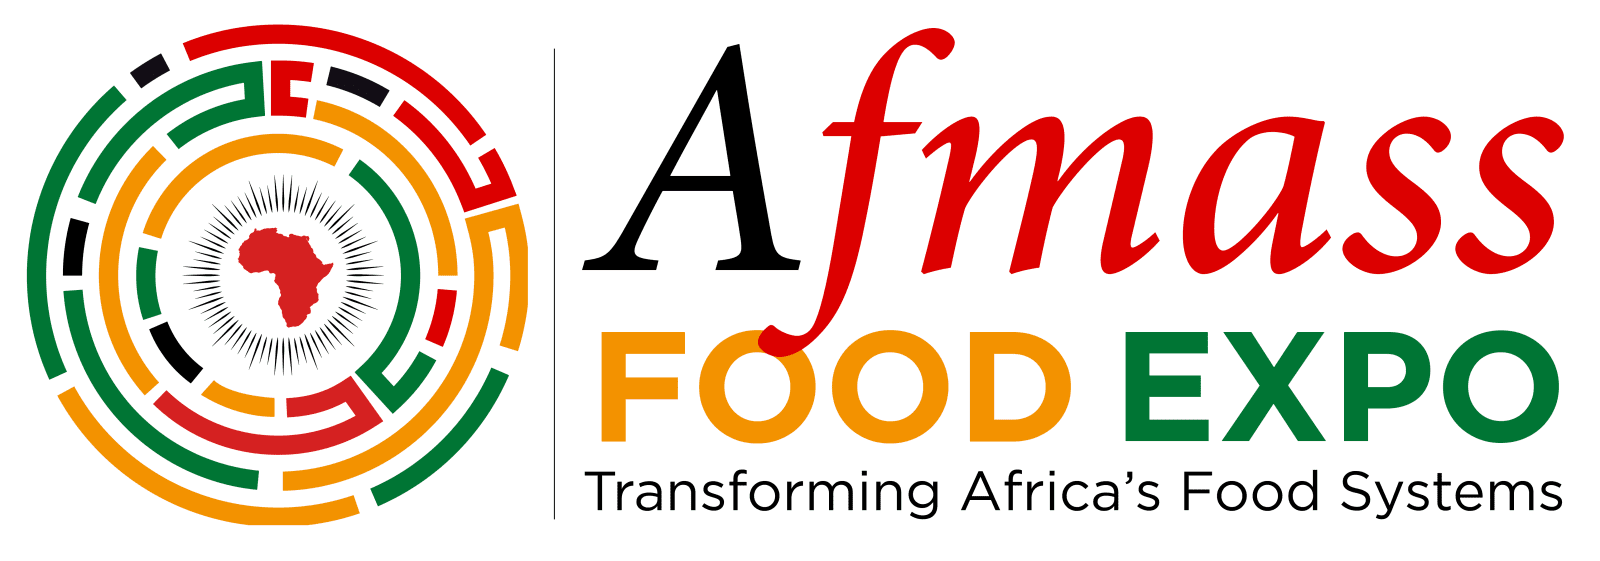 AFMASS Food Expos - Africa's Most Influential Food Industry & New Technologies Trade Shows